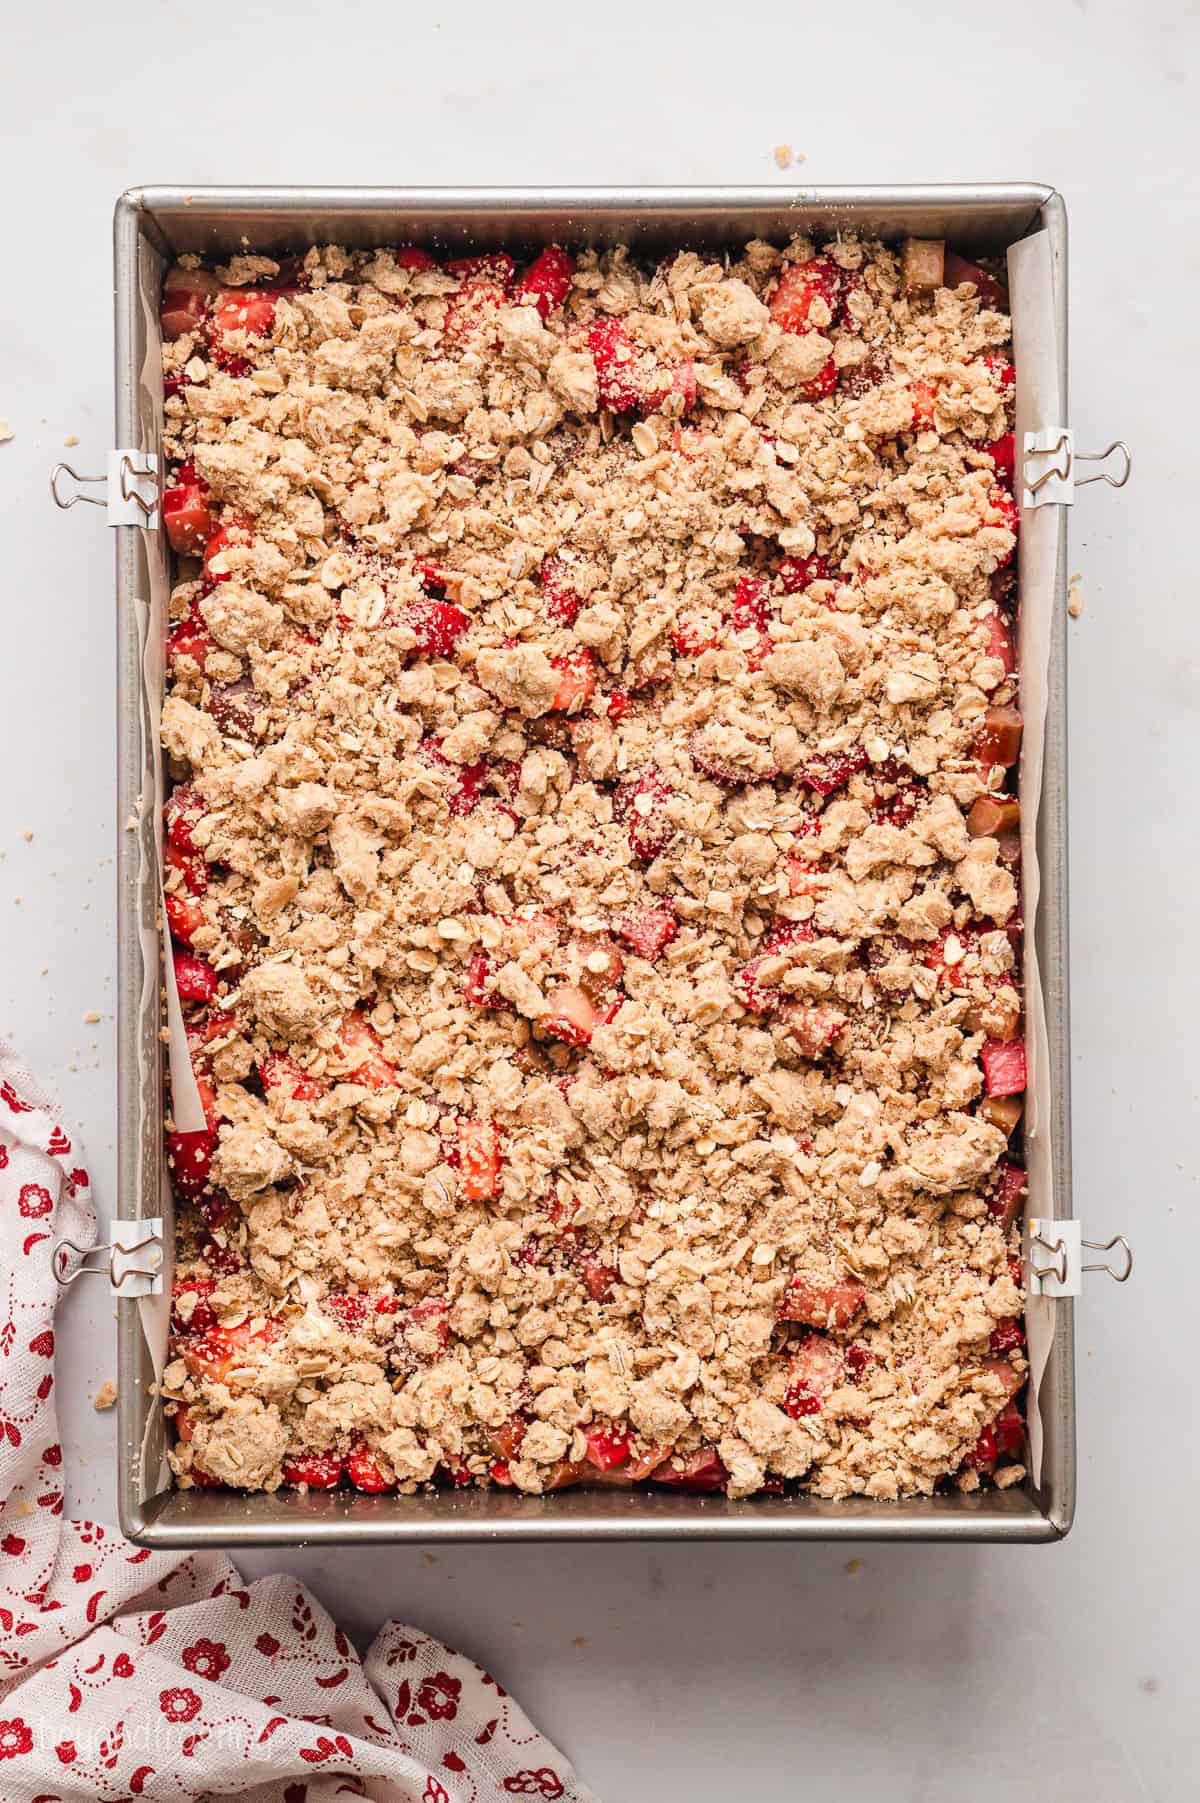 Assembled strawberry rhubarb crumb bars in a lined baking pan.